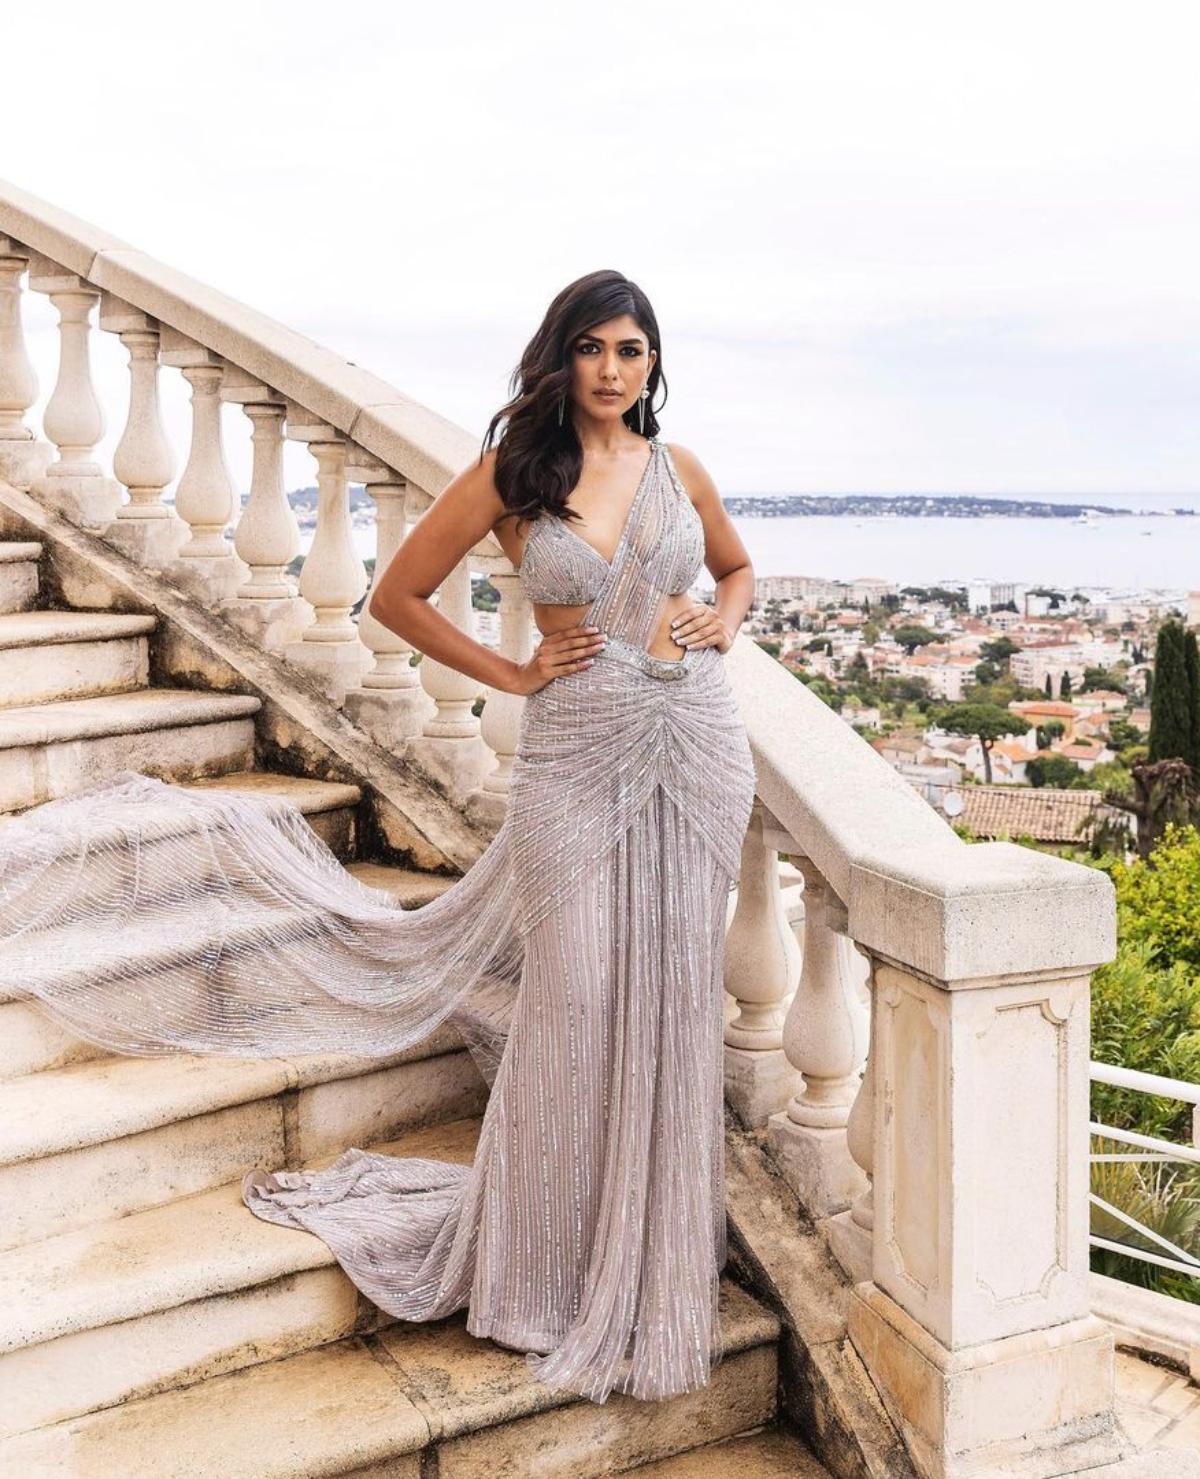 Another Cannes debutante from Bollywood, actor Mrunal Thakur who walked the coveted red carpet for the first time on day 2, made heads turn as she arrived wearing a shimmery lavender saree-styled gown from Falguni Shane Peacock. 